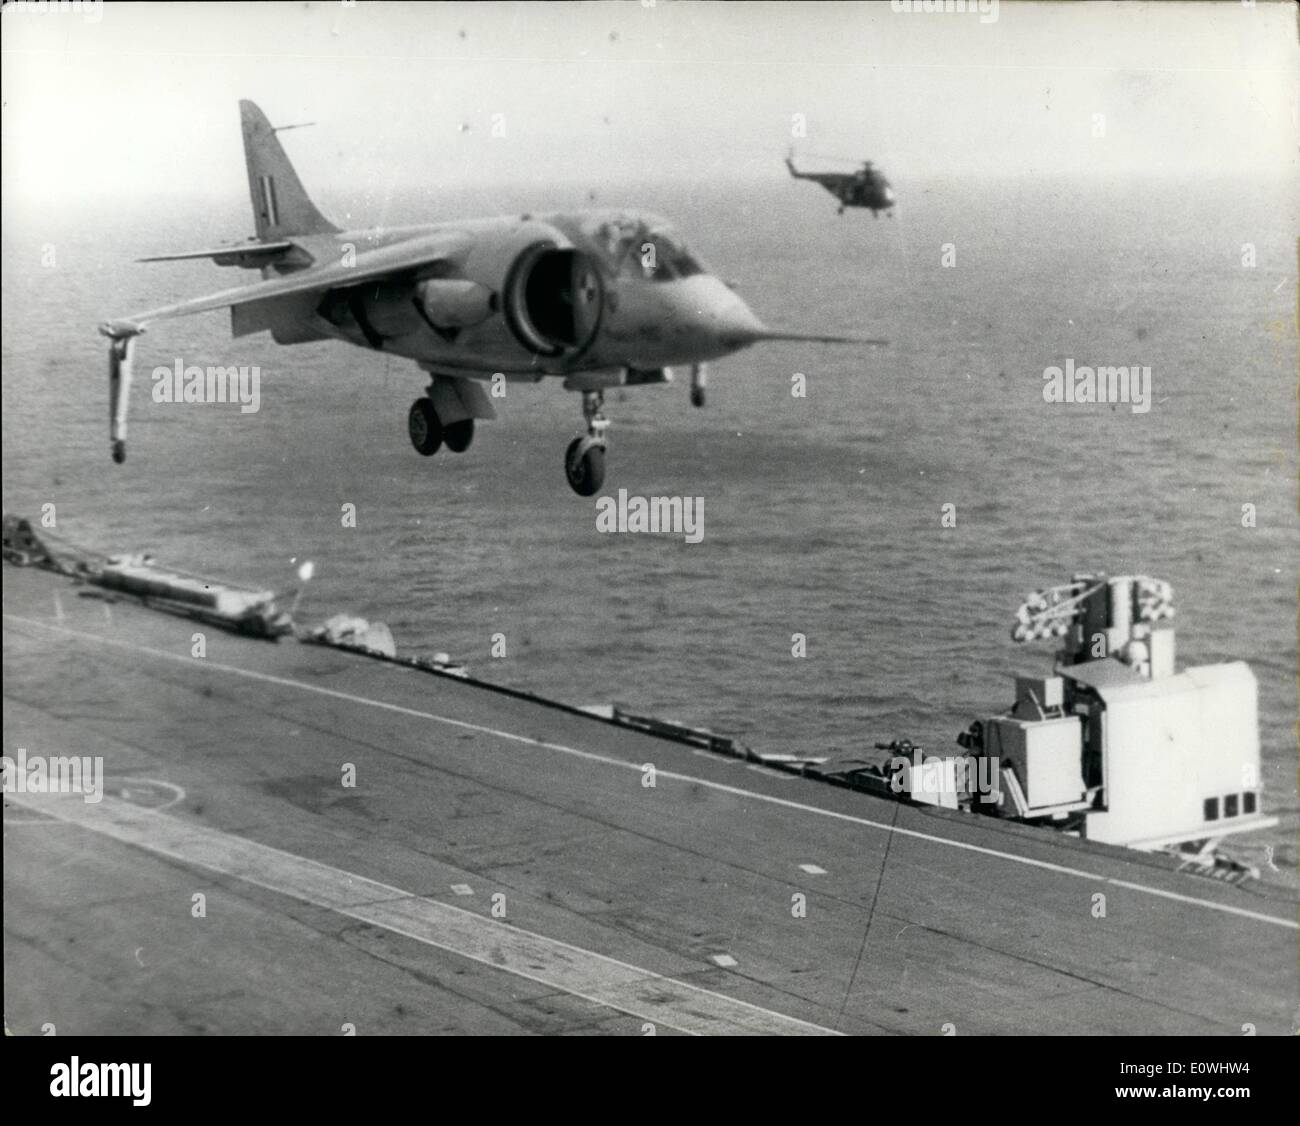 Feb. 02, 1963 - The Hawker P.1127 Makes First Vertical Landing On Aircraft Carrier.. Intensive flight trials were carried out during the week-end aboard the aircraft carrier H.M.S. Ark Royal in the Channel - during which the Hawker P.1127 subsonic strike fighter made the first ever vertical landing by a jet aircraft on a carrier - at sea.. Keystone Press Shows:- The Hawker P.1127 during her landing trials aboard the H.M.S. Ark Royal. Stock Photo